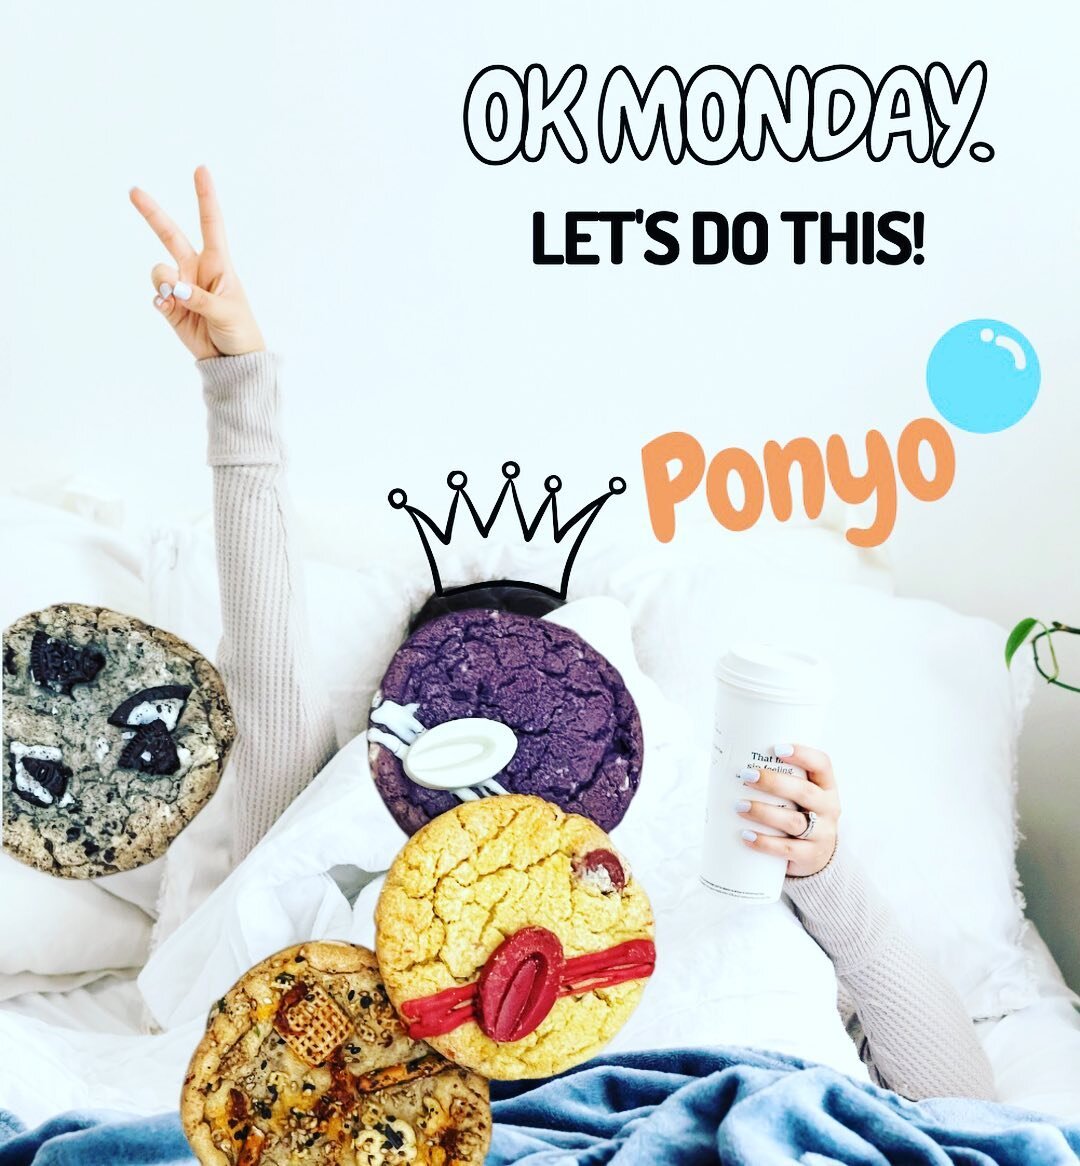 Let&rsquo;s do this Monday!! We gotchu&hellip;if you are like us at Ponyo, we are stuffing our face with lots of @mackboxdesserts cookies of all flavors with coffee and tea this morning. Happy Monday Y&rsquo;all ⚡️
.
#ponyofoods #ponyosnacks #cookies